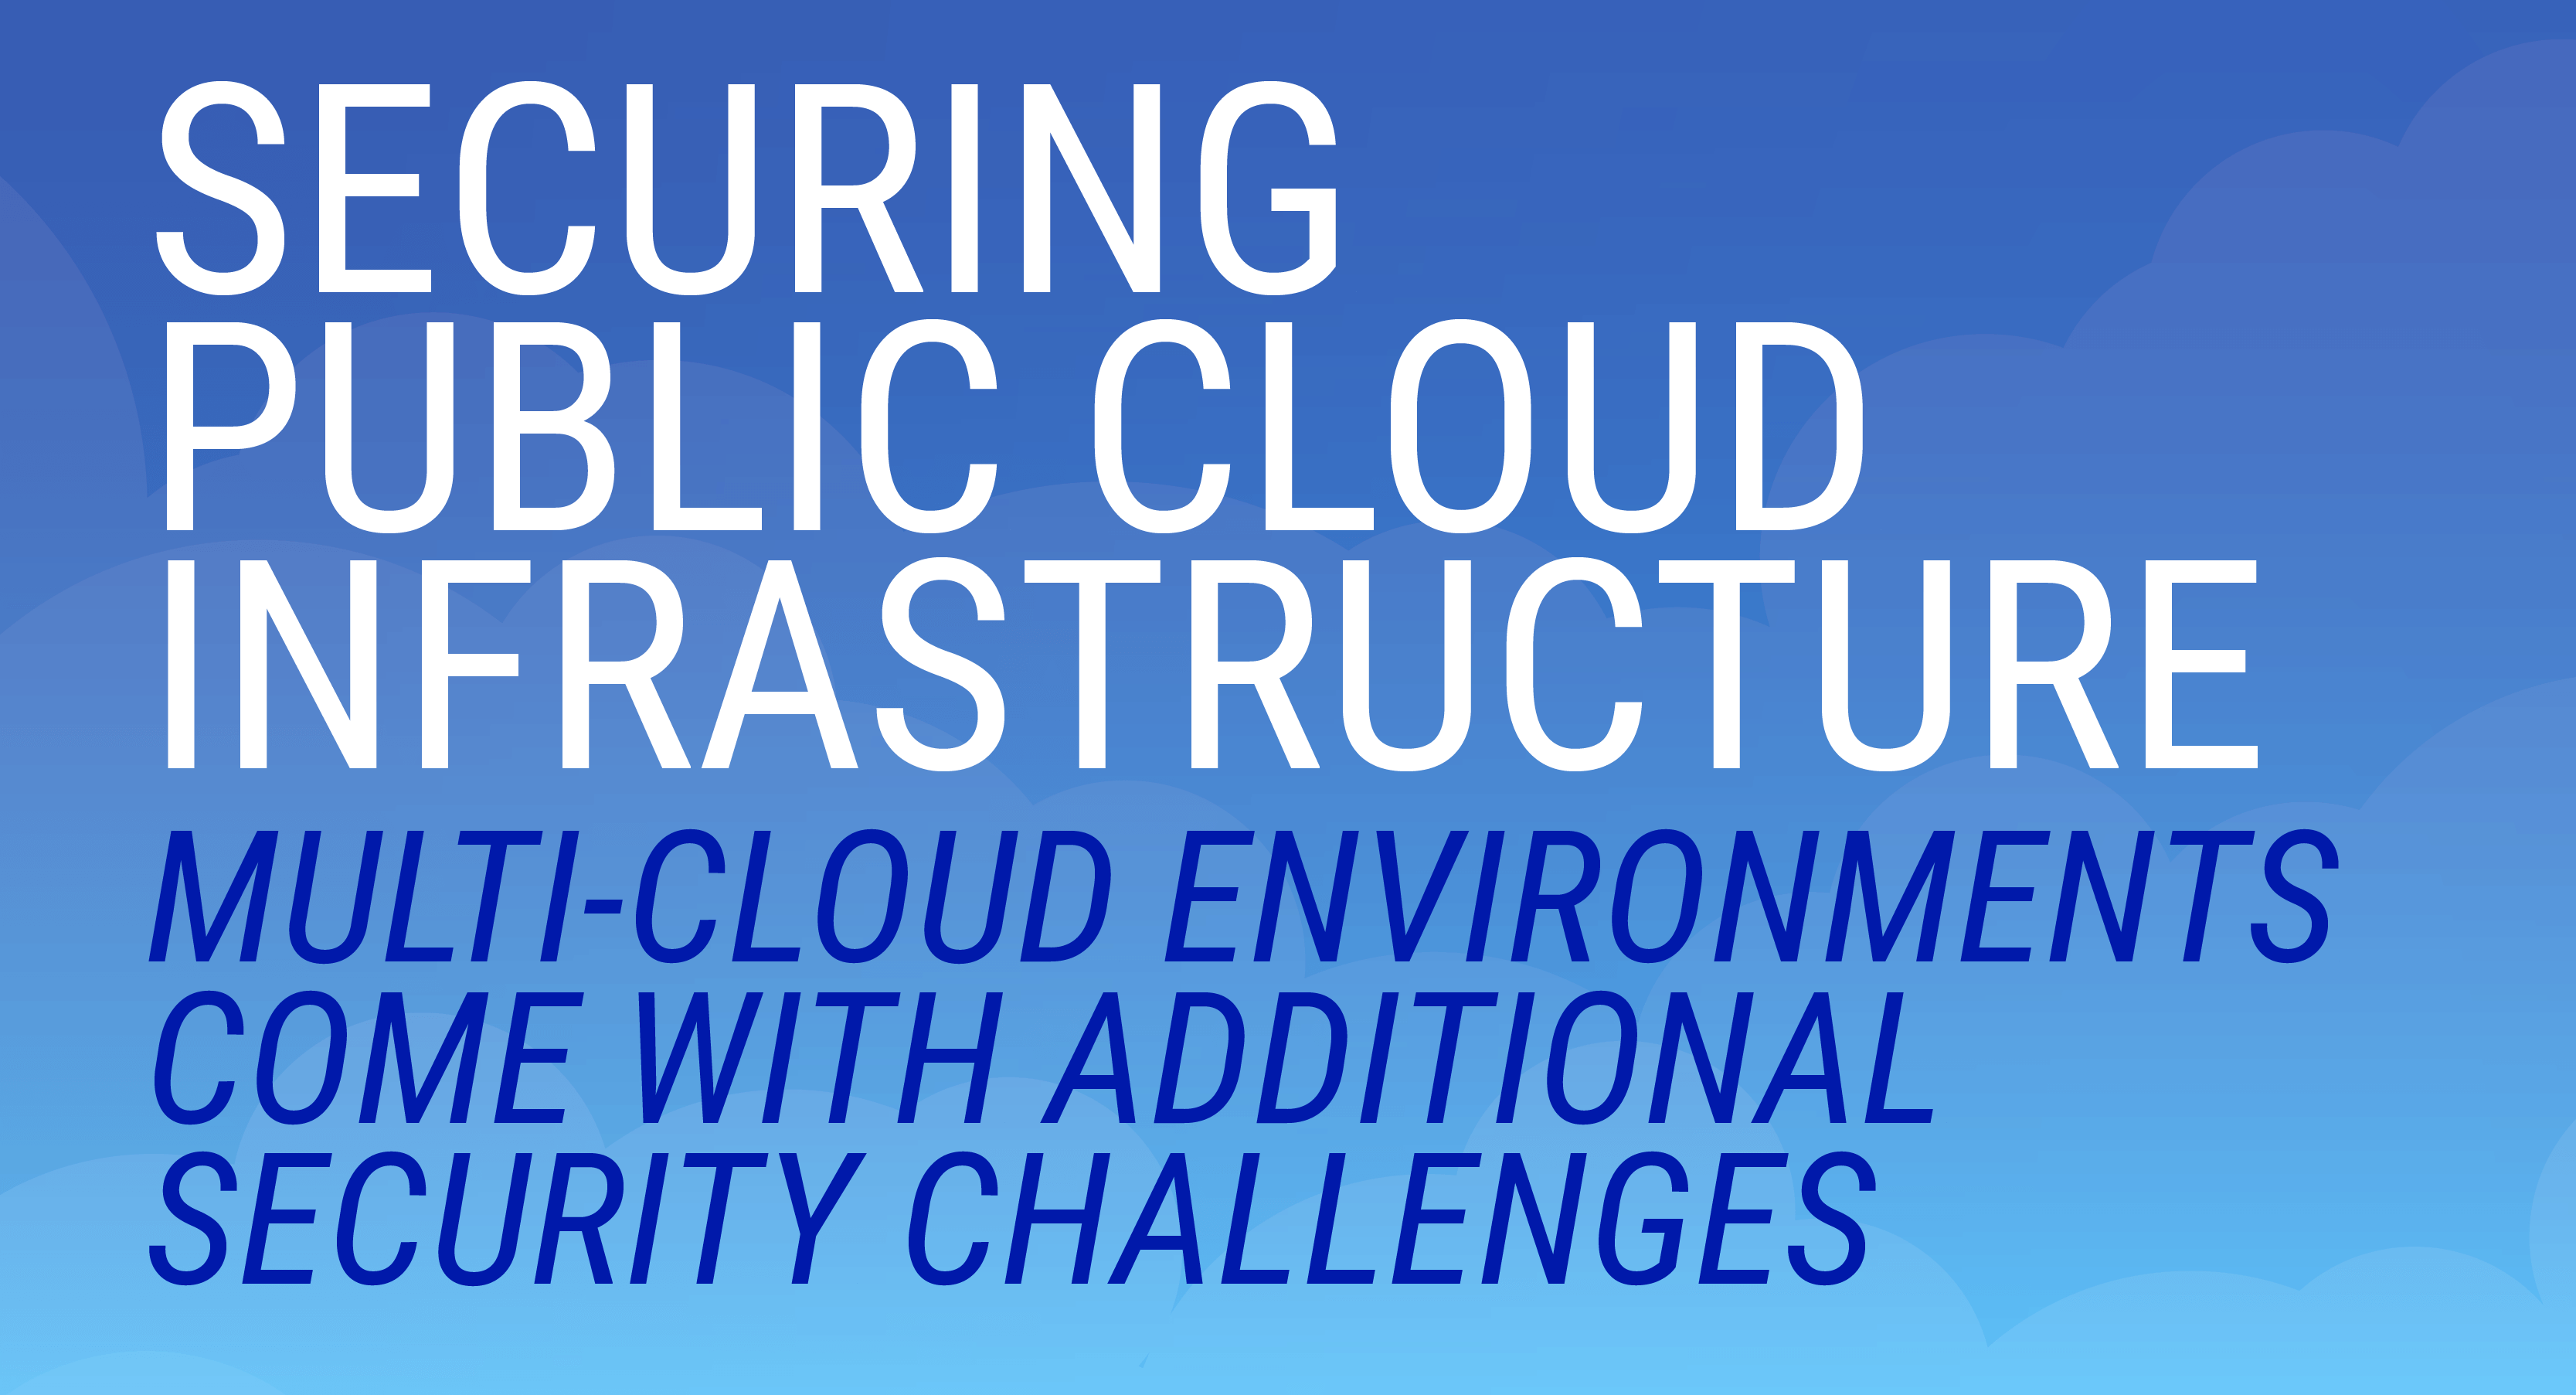 98% of Infosec Pros Say Multi-Cloud Environments Create Additional Security Challenges, Reveals Survey